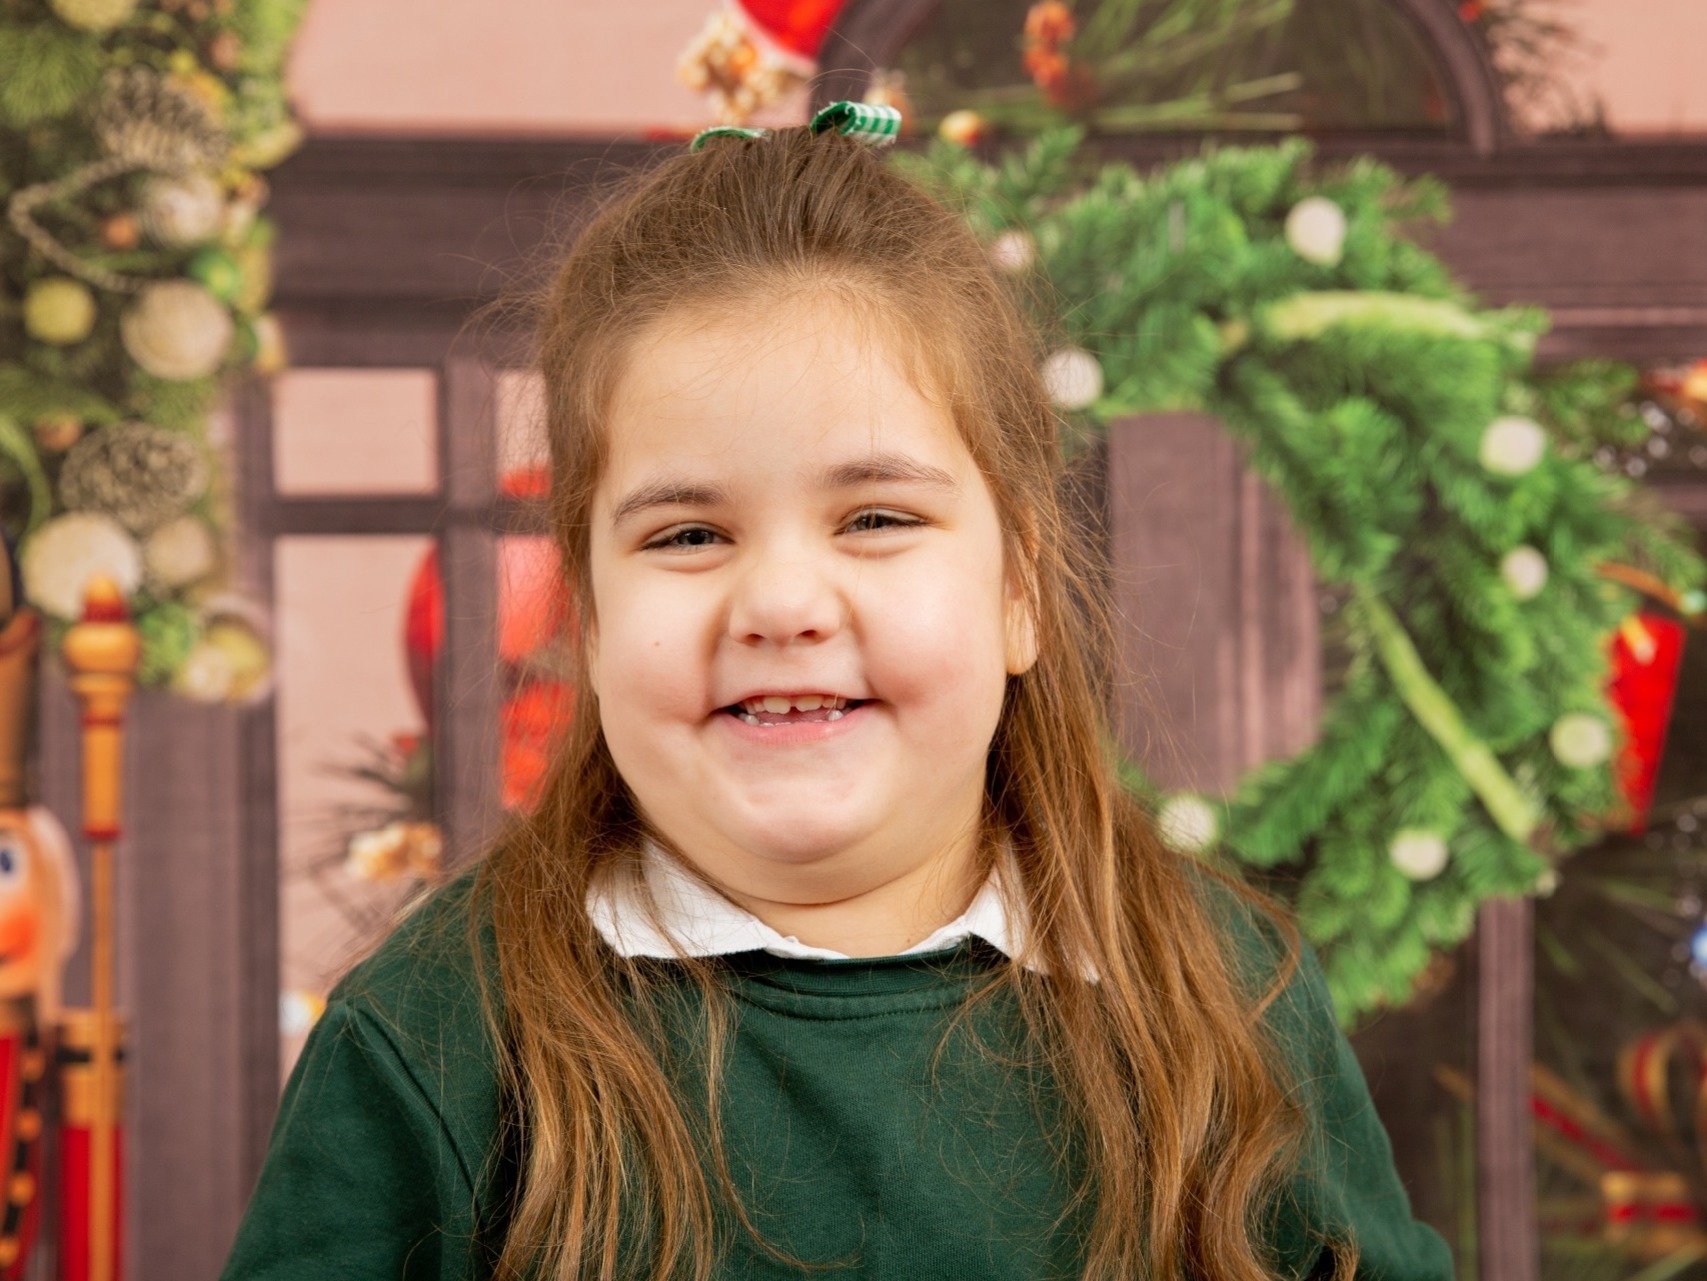 Gorgeous young girl with special needs having some festive fun in a formal Christmas portrait